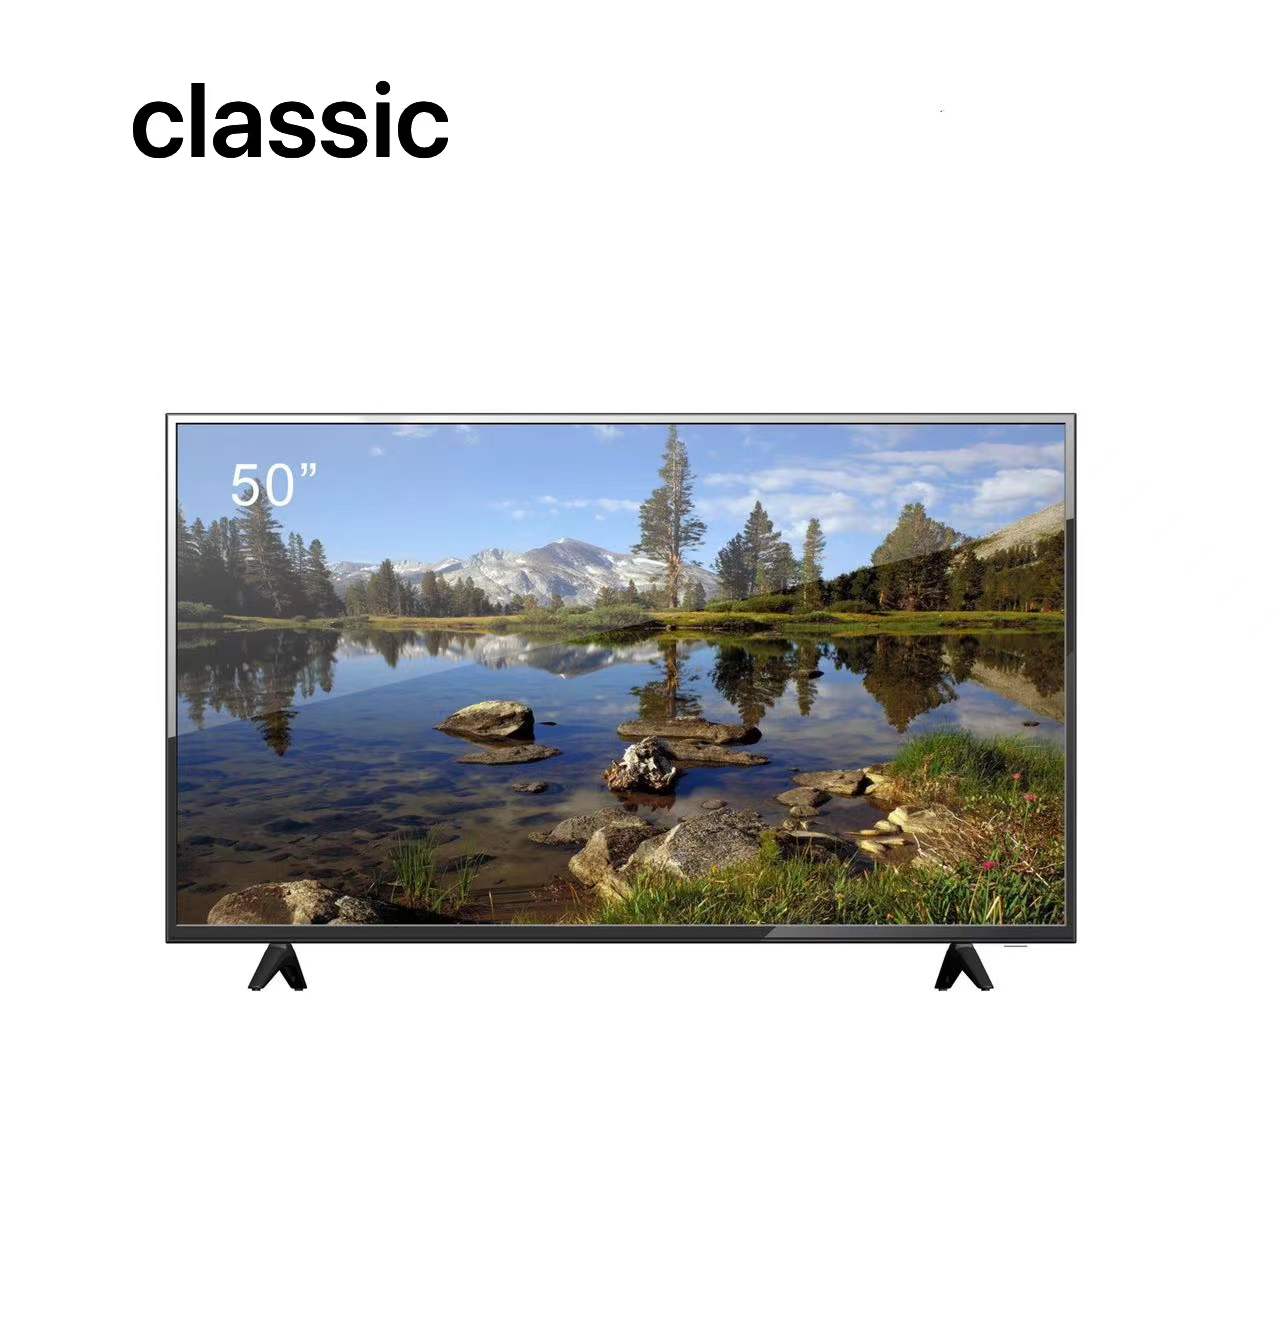 POS expressFactory direct Sale Good quality TV Cheap TV 40-inch Android Smart LED LCD television